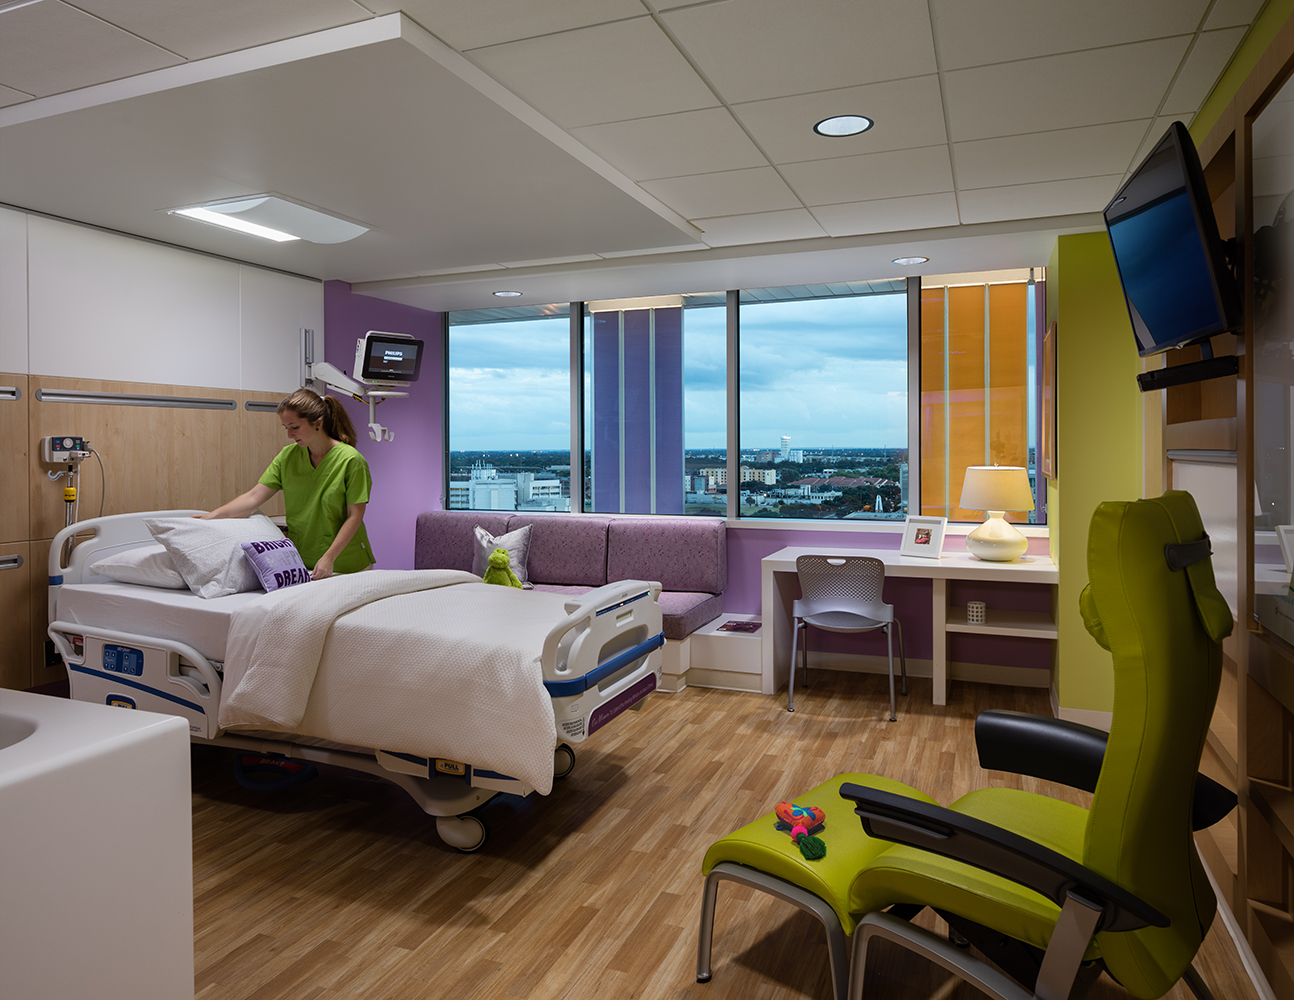 Unity overbed luminaire provides patient room lighting while a nurse adjusts the bedding.